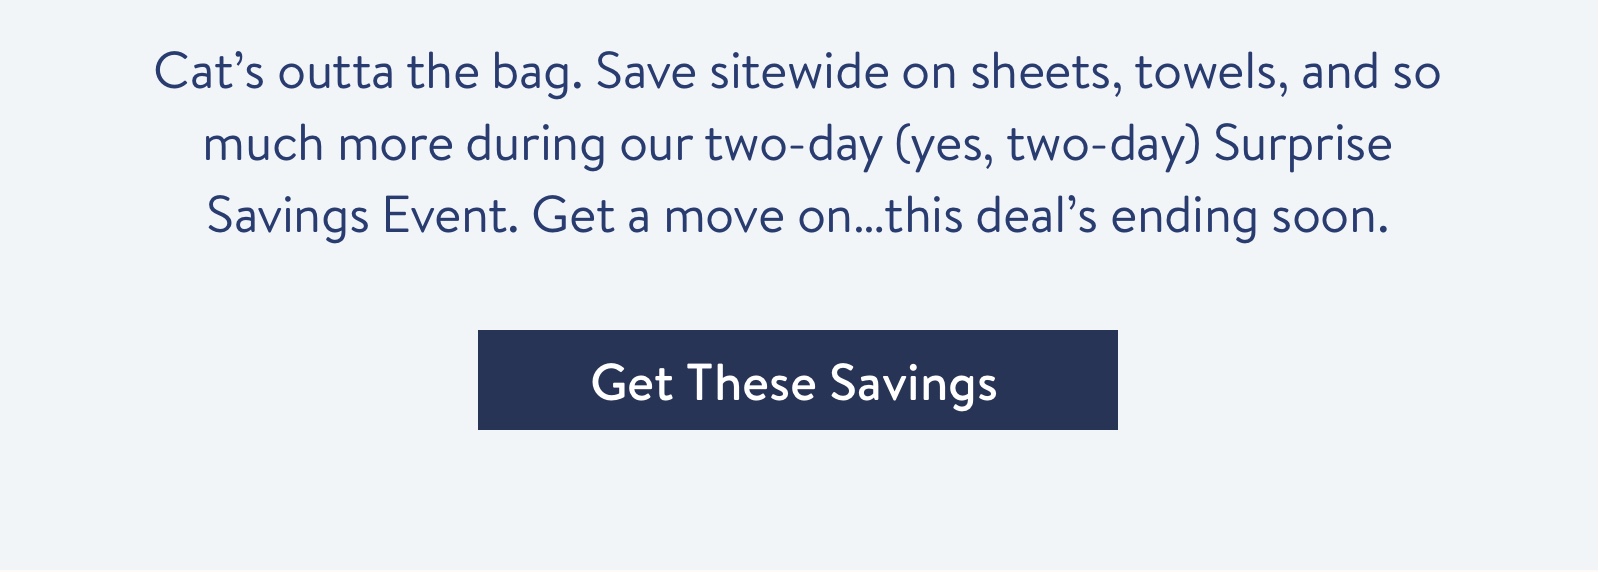 Save sitewide on sheets, towels, and so much more during our two-day (yes, two-day) Surprise Savings Event.